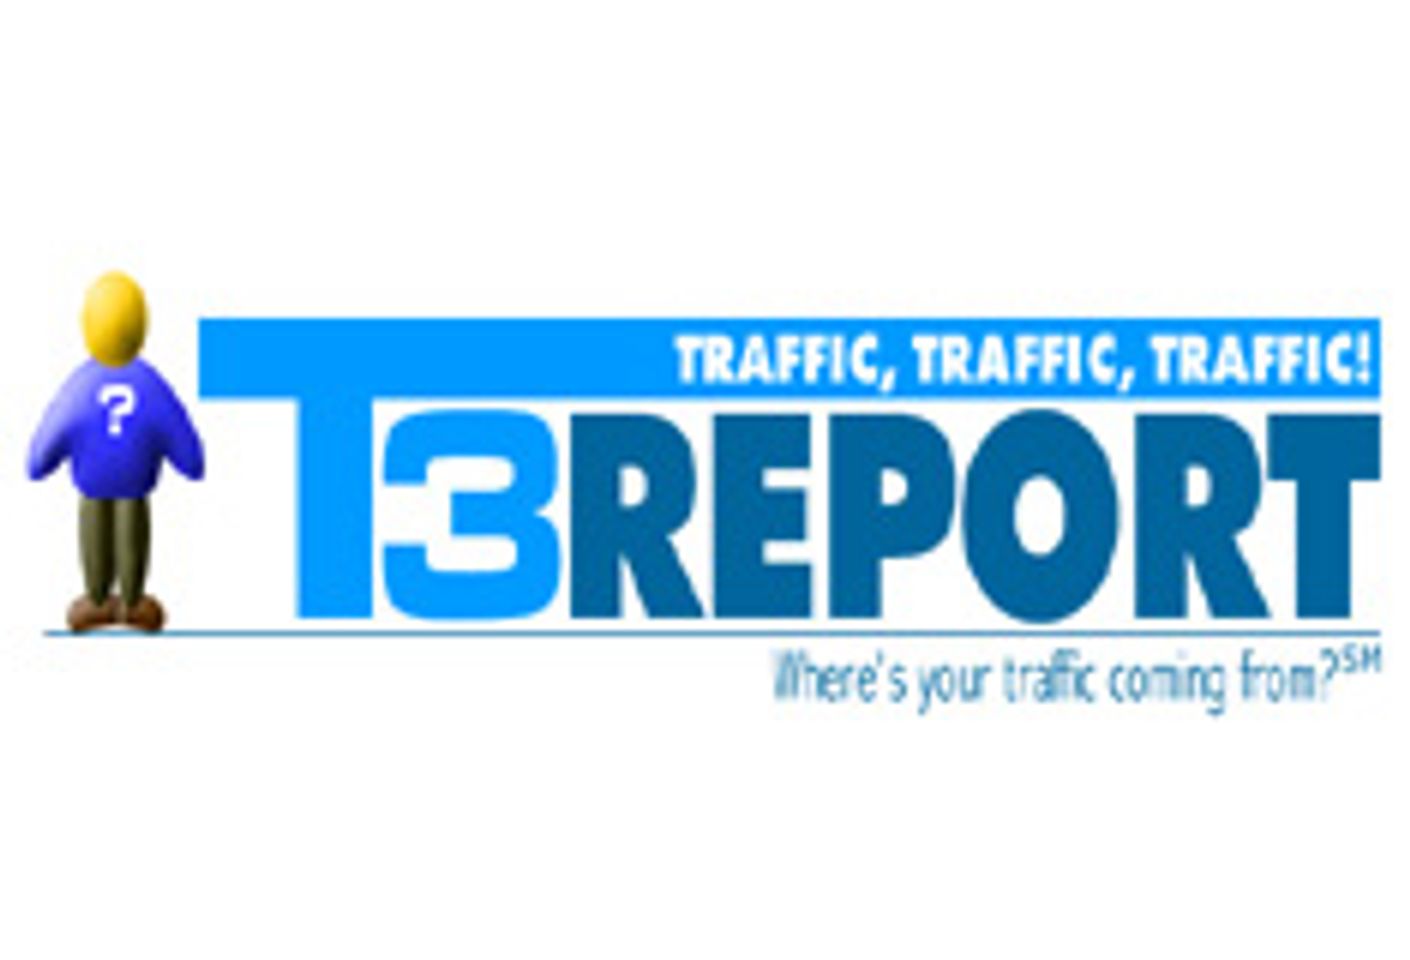 New Traffic Analysis Reporting from T3Report.com